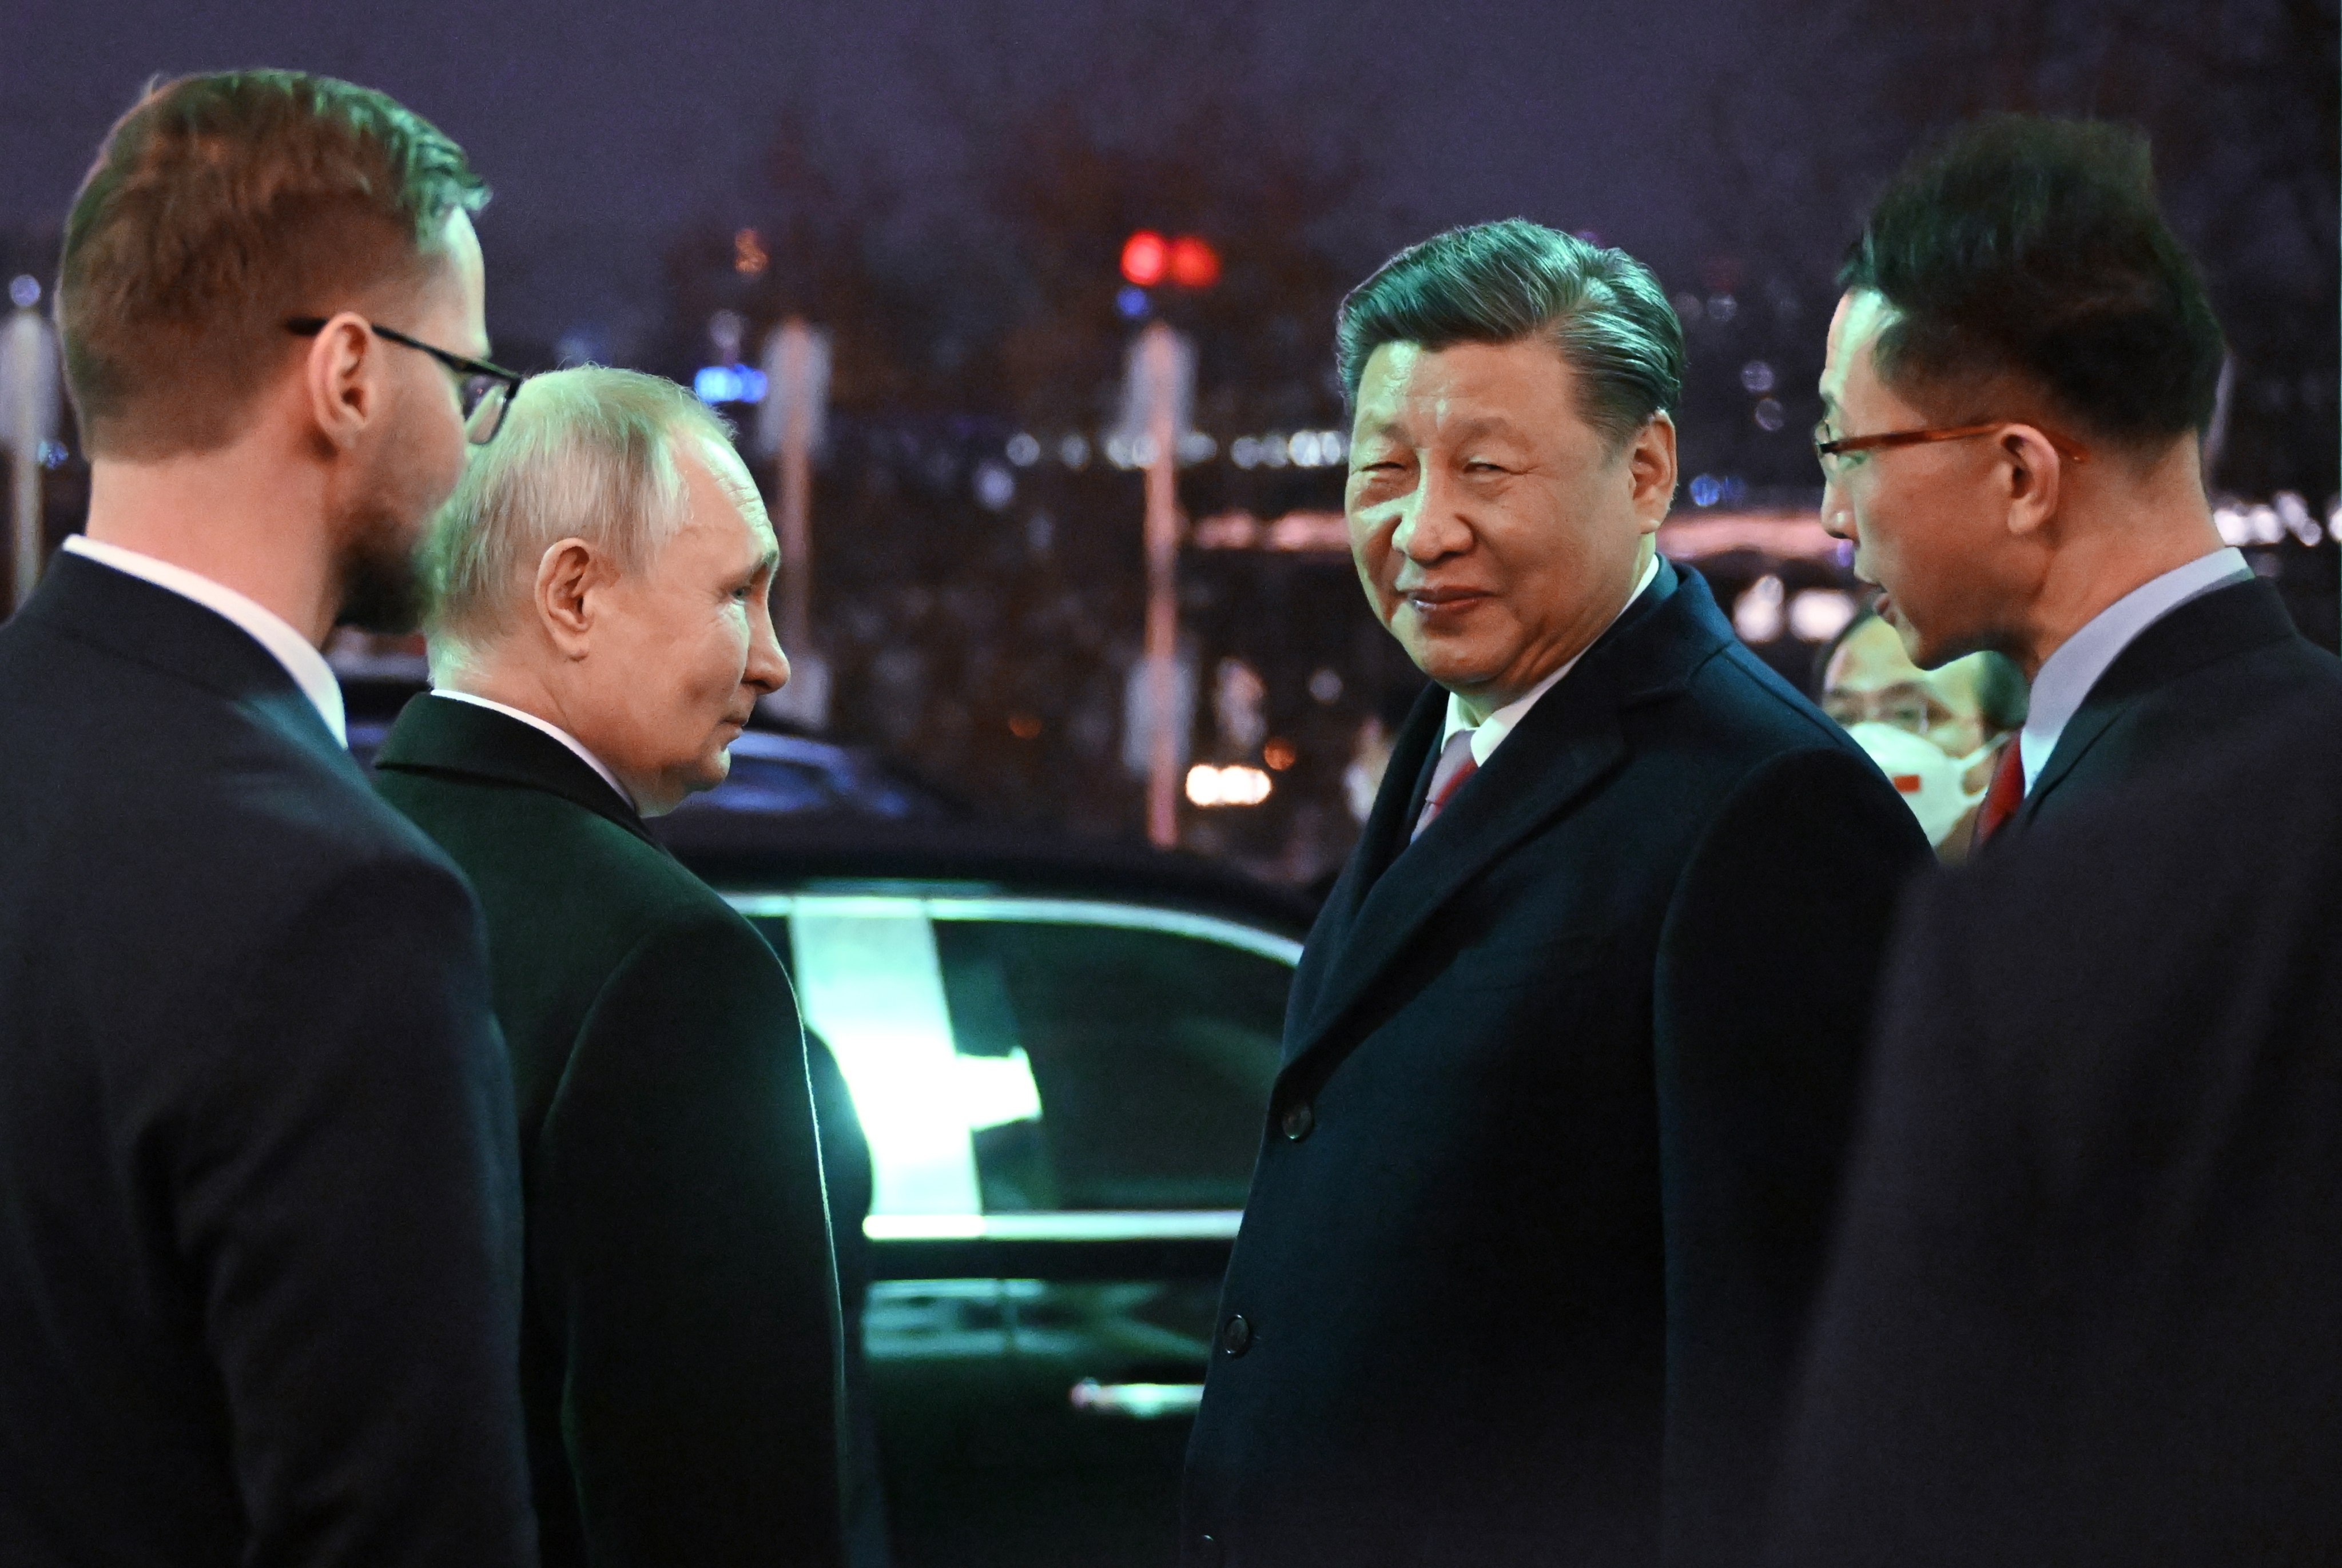 Xi Jinping last met “dear friend” Vladimir Putin in person six months ago, in Moscow. The two leaders could meet again in Beijing in October. Photo: EPA-EFE